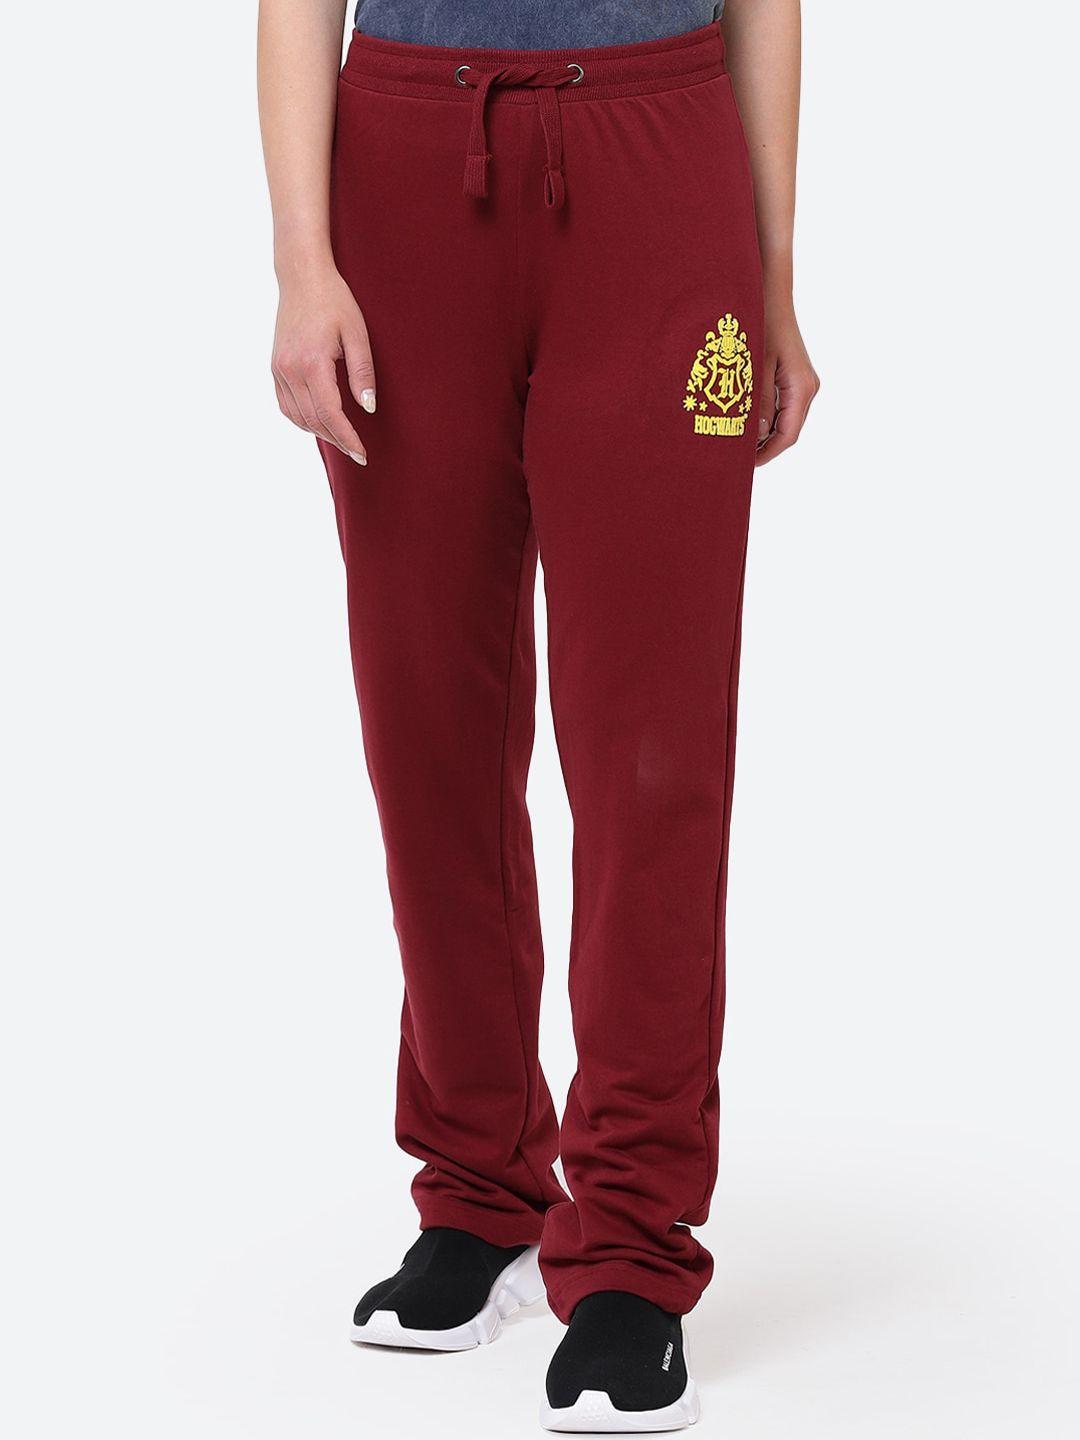 free authority women maroon harry potter printed track pants